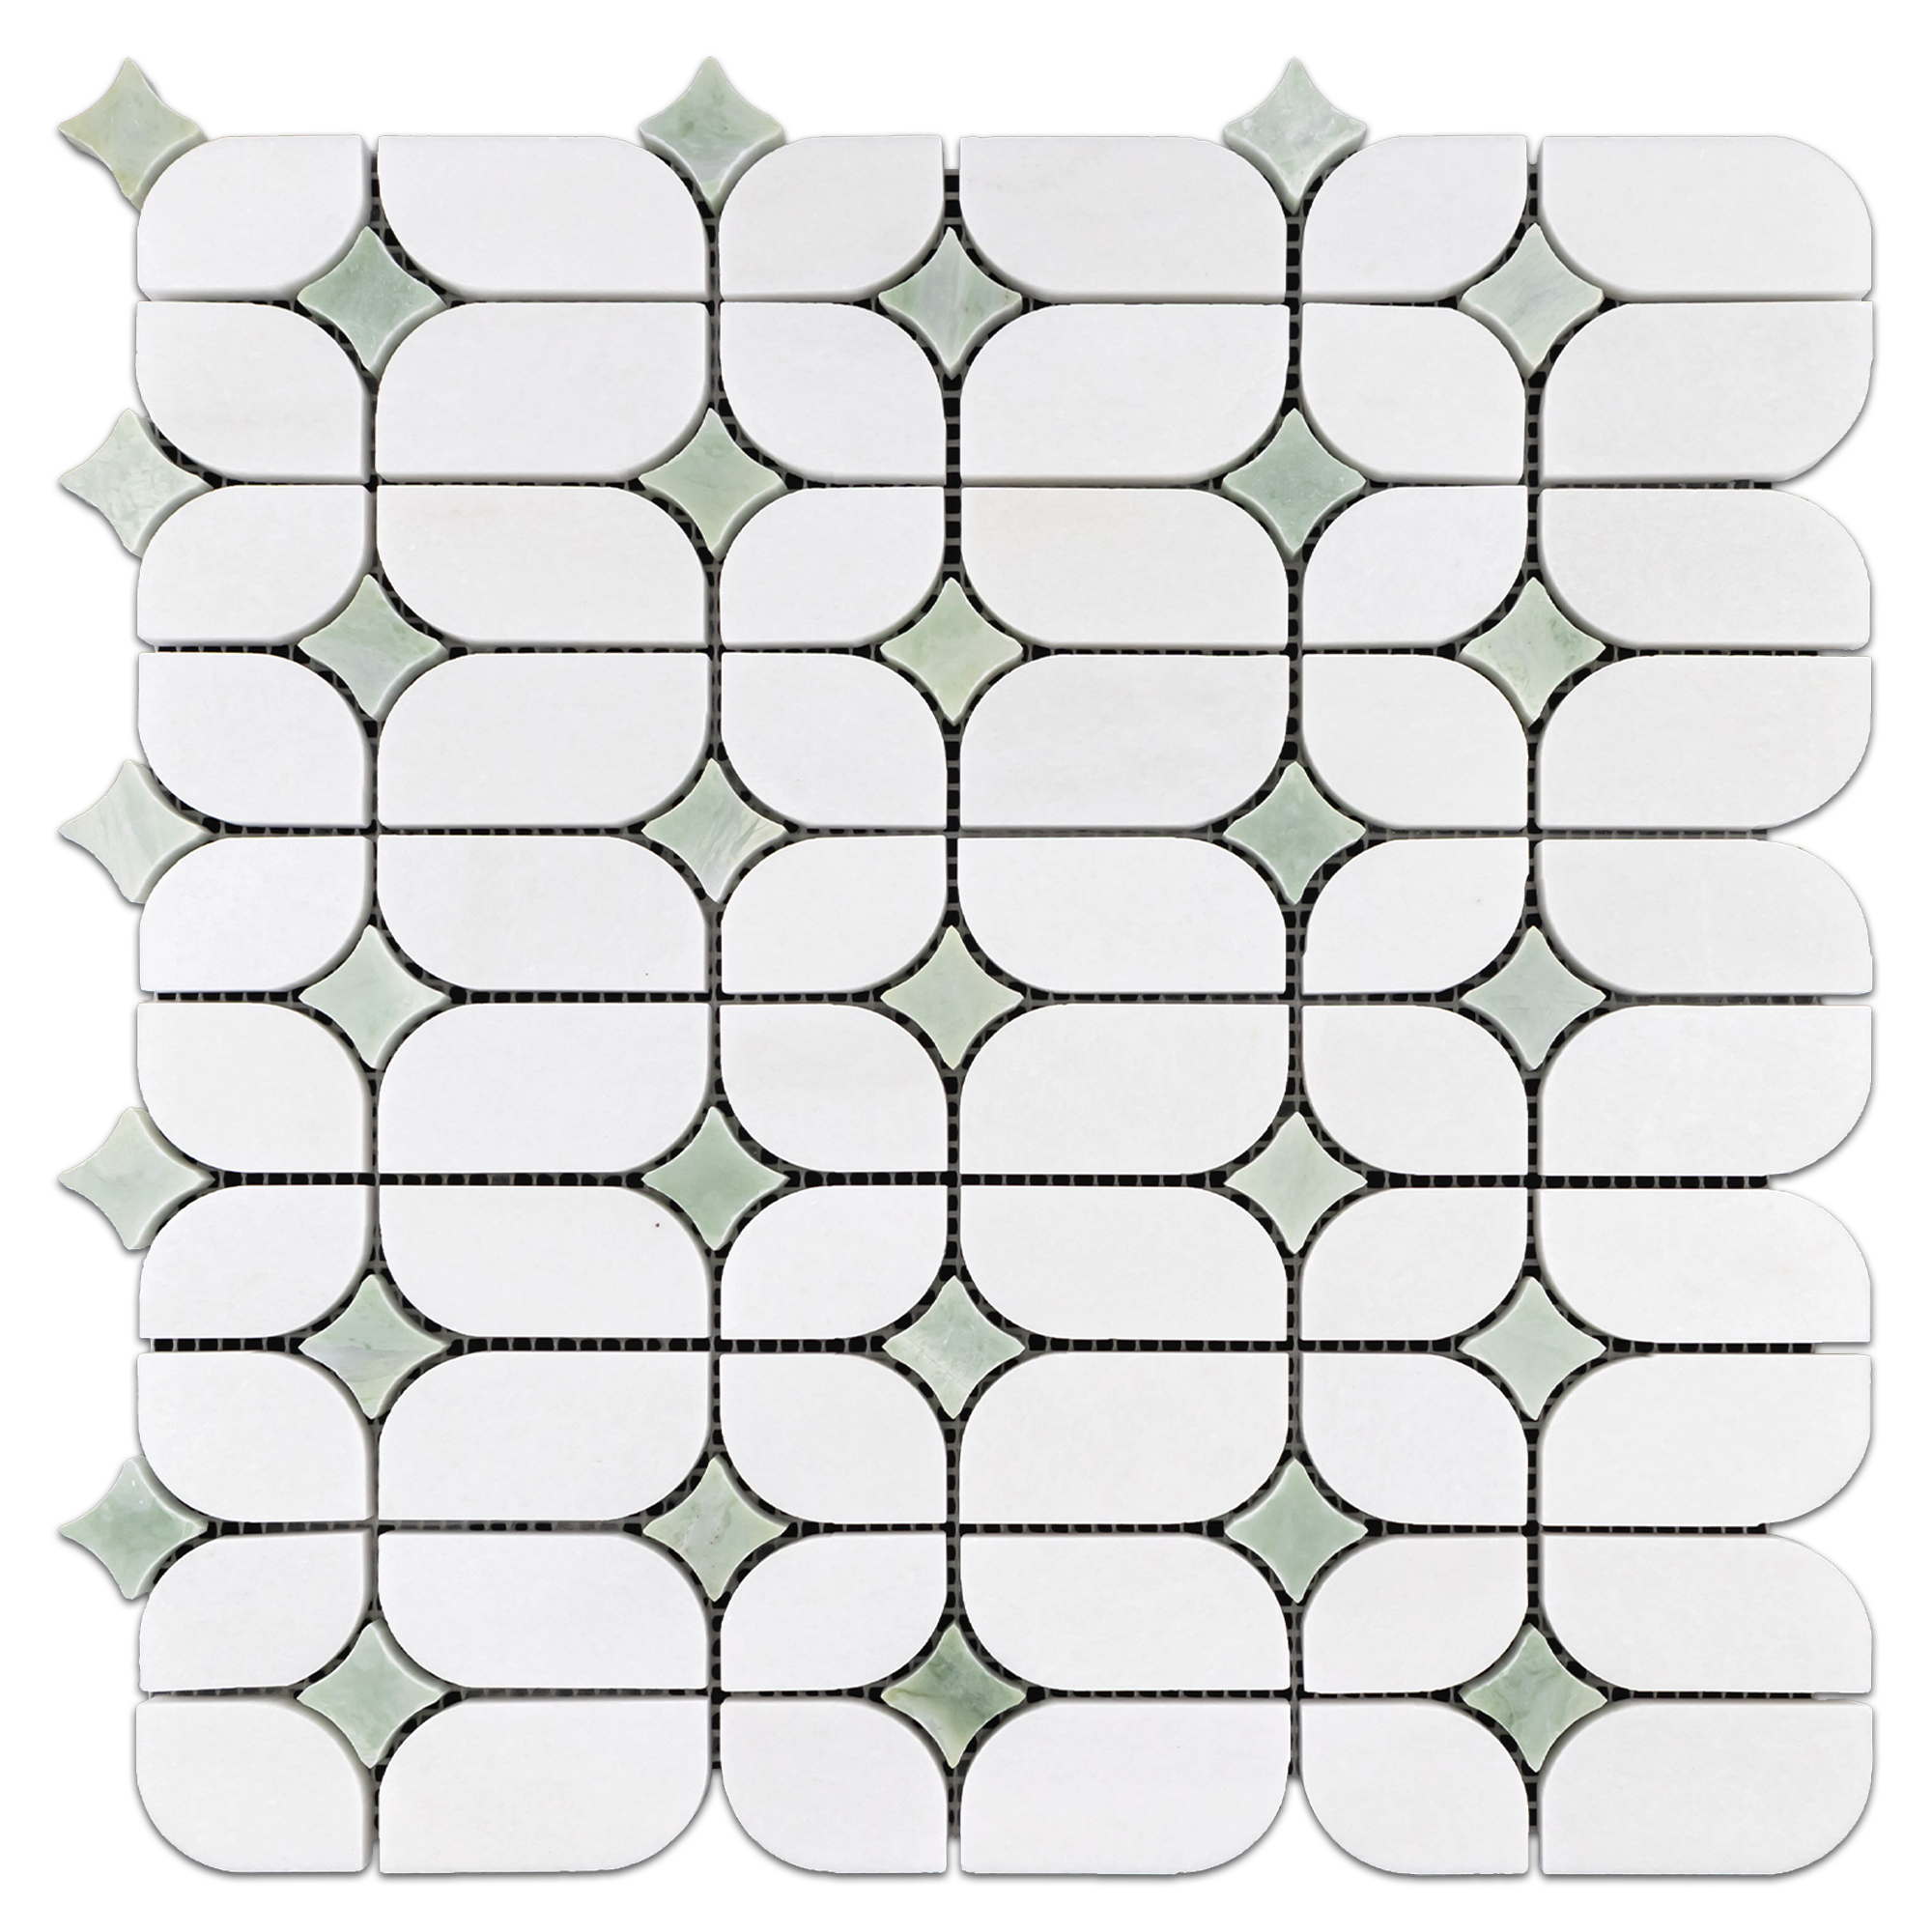 Elon White Thassos Ming Green Marble Starlight Field Mosaic 12x12x0.375 Polished Tile - Surface Group International Product